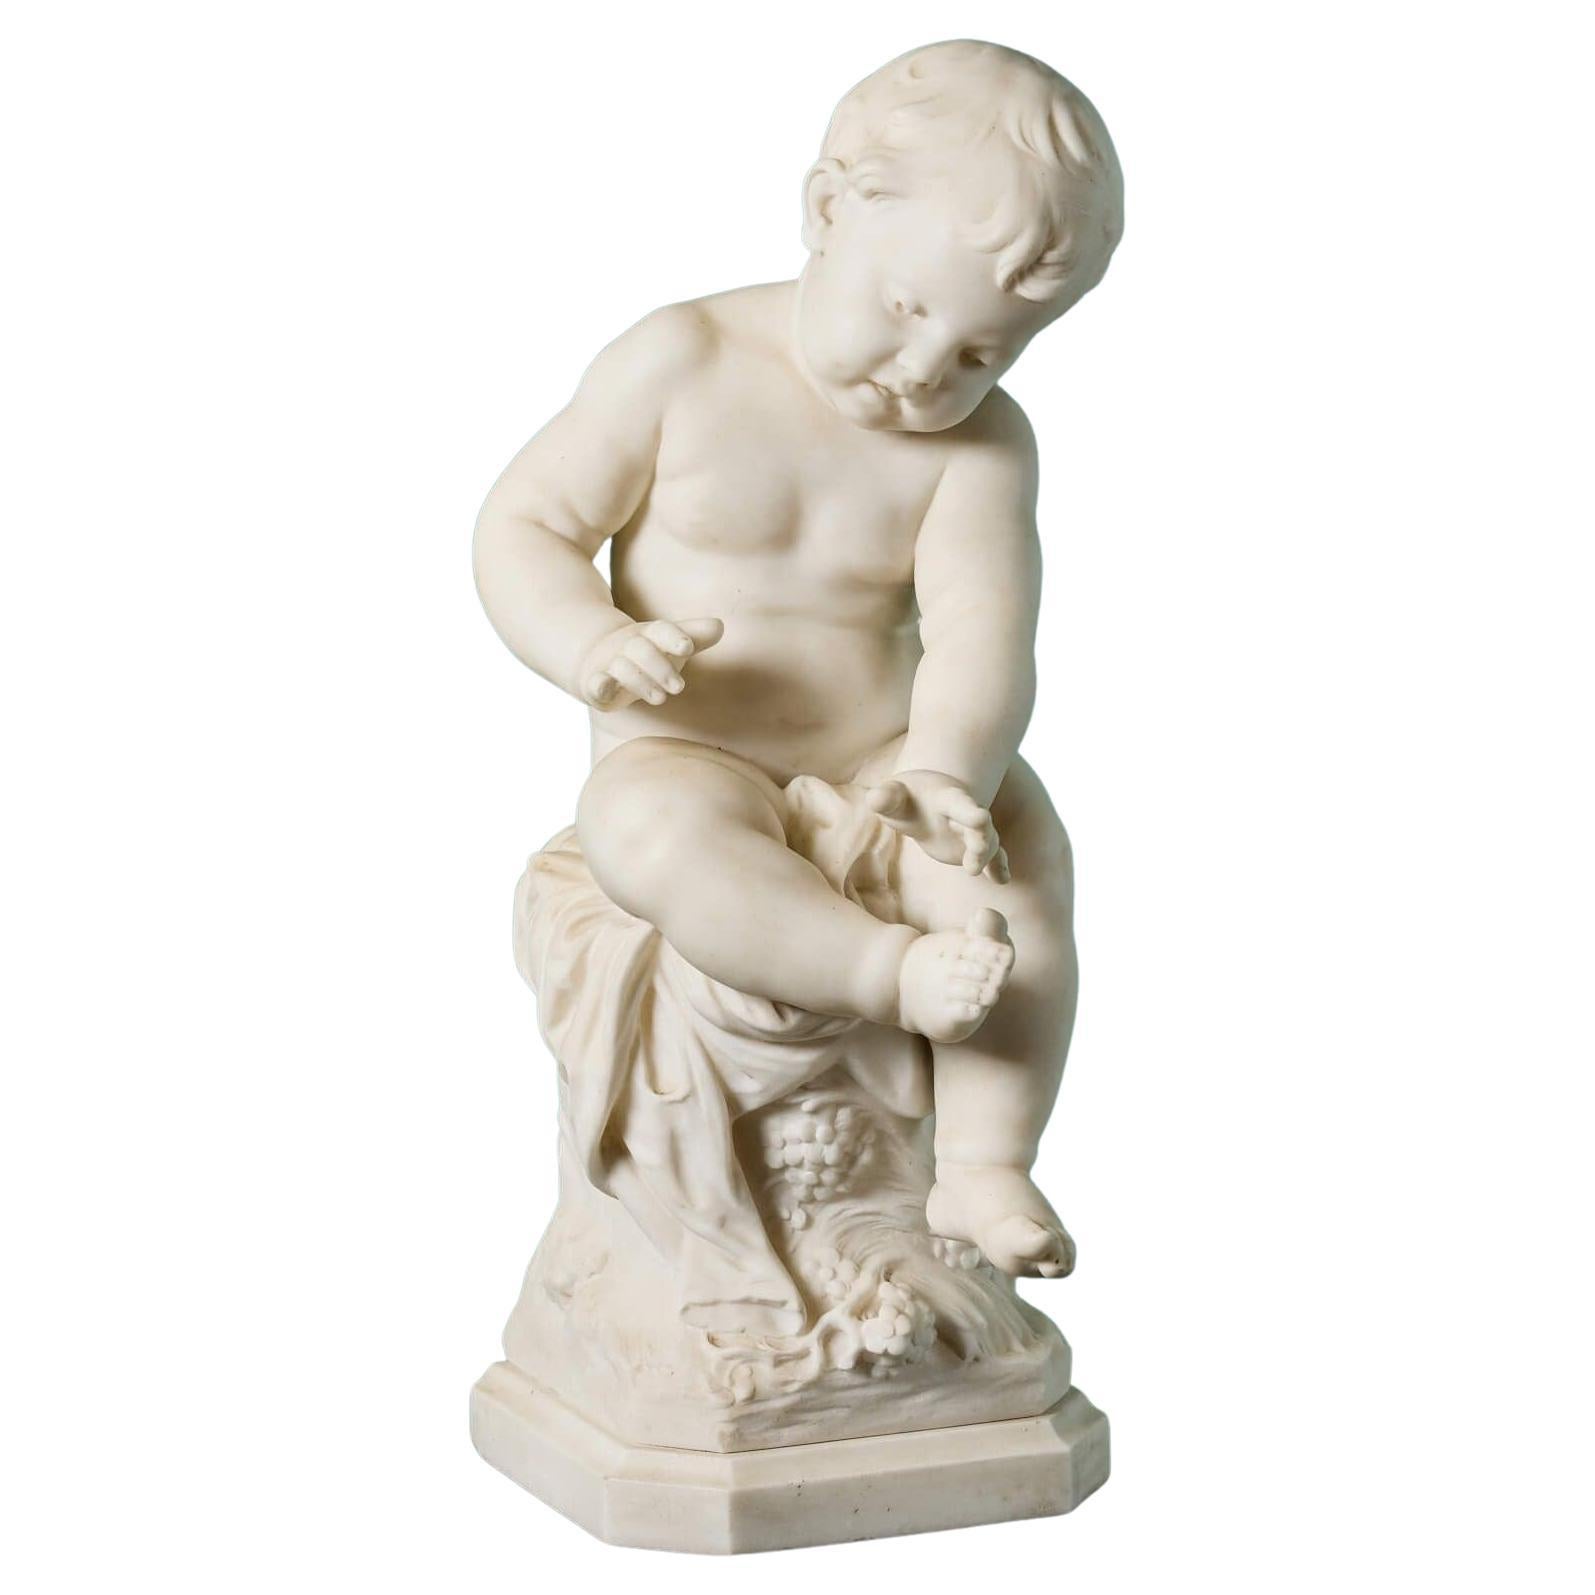 Marble Statue of an Infant by Auguste Moreau